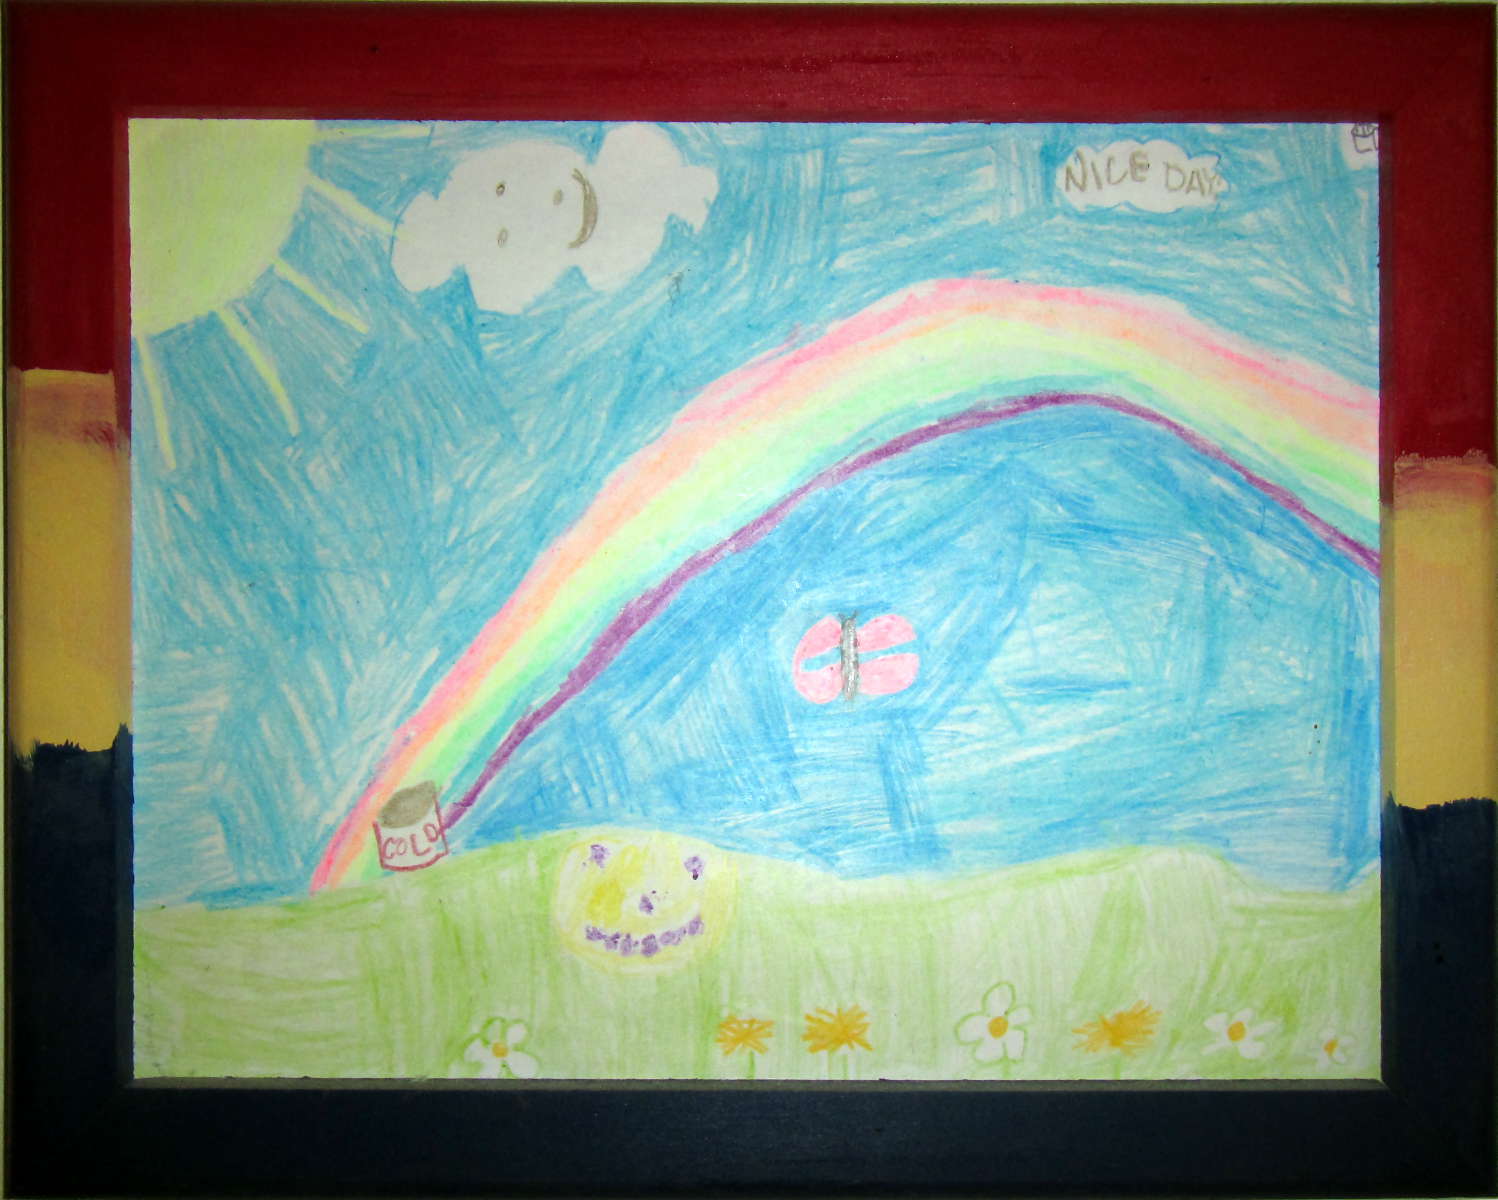 A grassy field with blue sky and a rainbow.  In the upper-left corner, there's a yellow sun.  There's a small pot of gold at the end of the rainbow.  There are two clouds in the sky, one of which says ":-)" and the other says, in uppercase letters, "Nice day".  Below the rainbow there's a pink butterfly with blue stripes on zir wings.  At the bottom of the field are yellow and white flowers, and above that there are purple and yellow flowers in the shape of a smiley face.